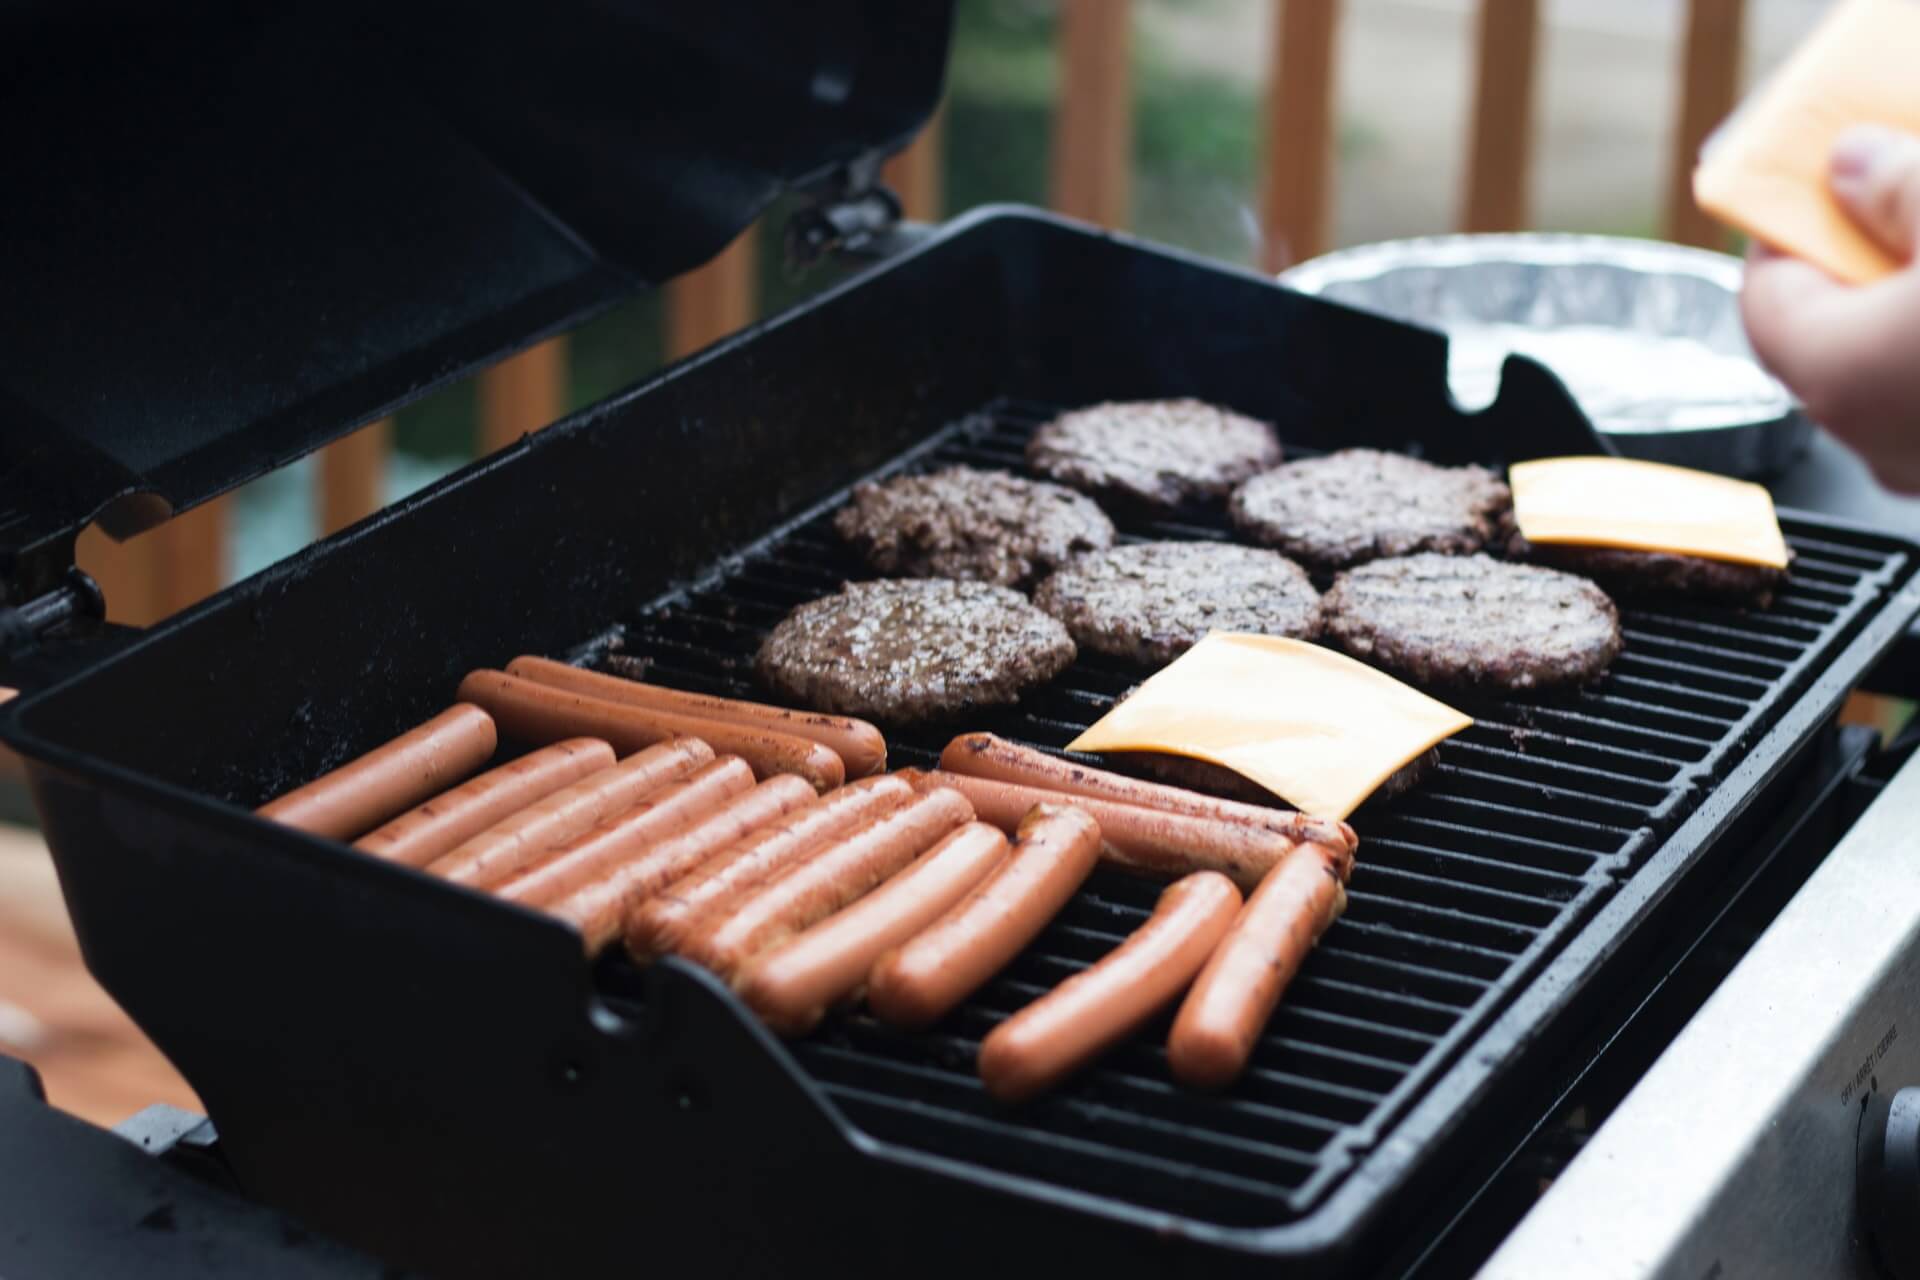 hotdogs and cheeseburgers on a black grill backpacking america